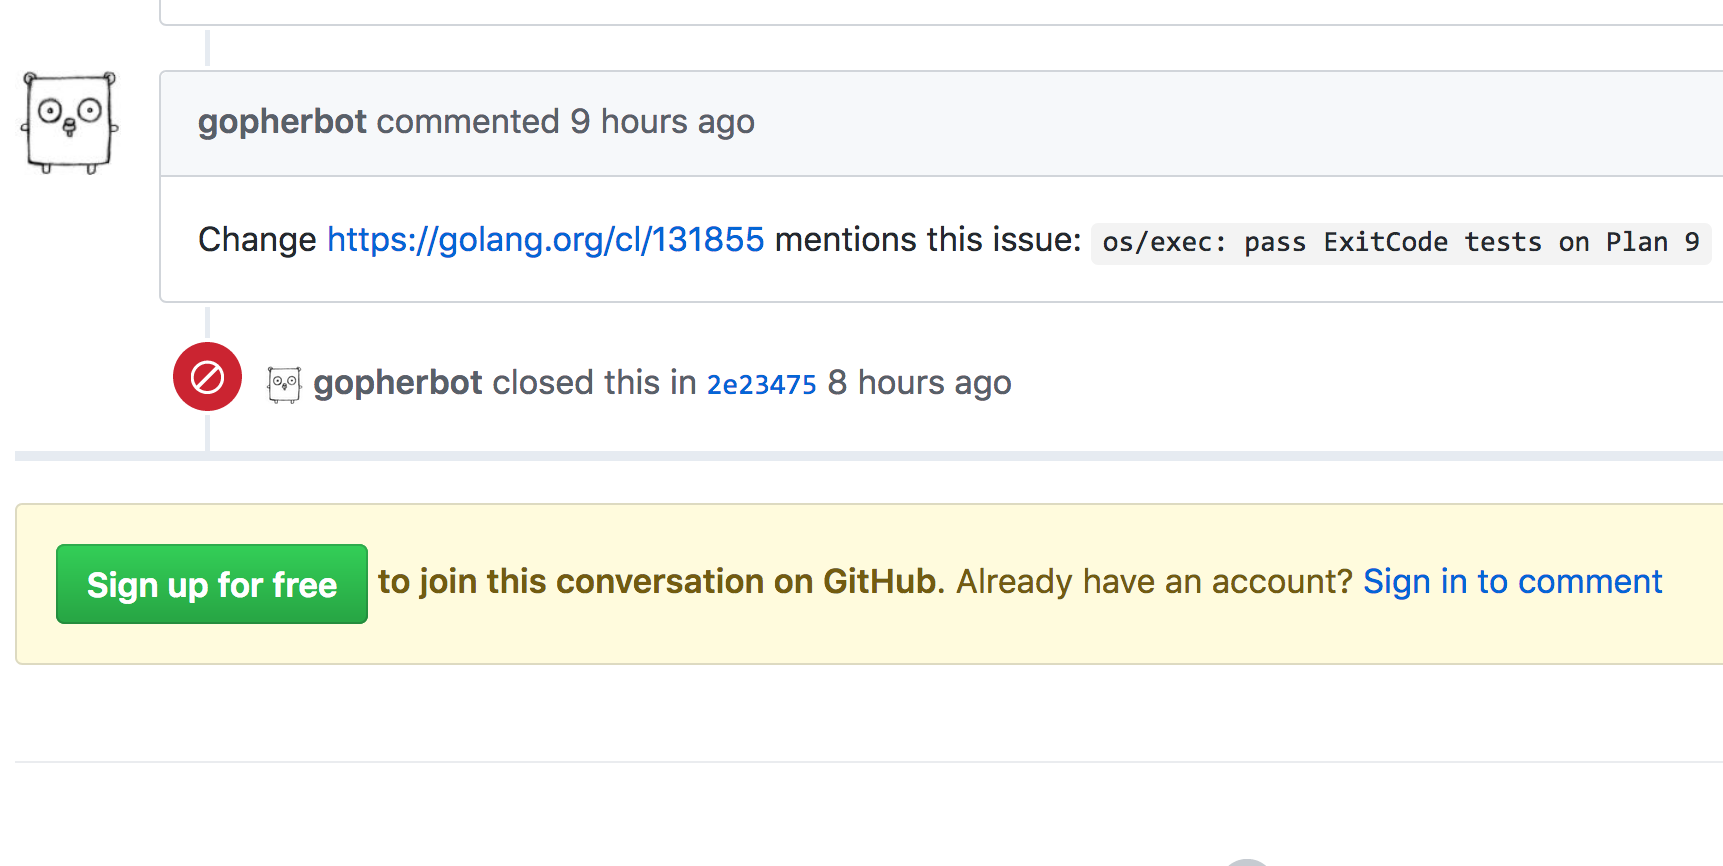 Gopherbot is a tool whose source code is in the golang.org/x/build repo